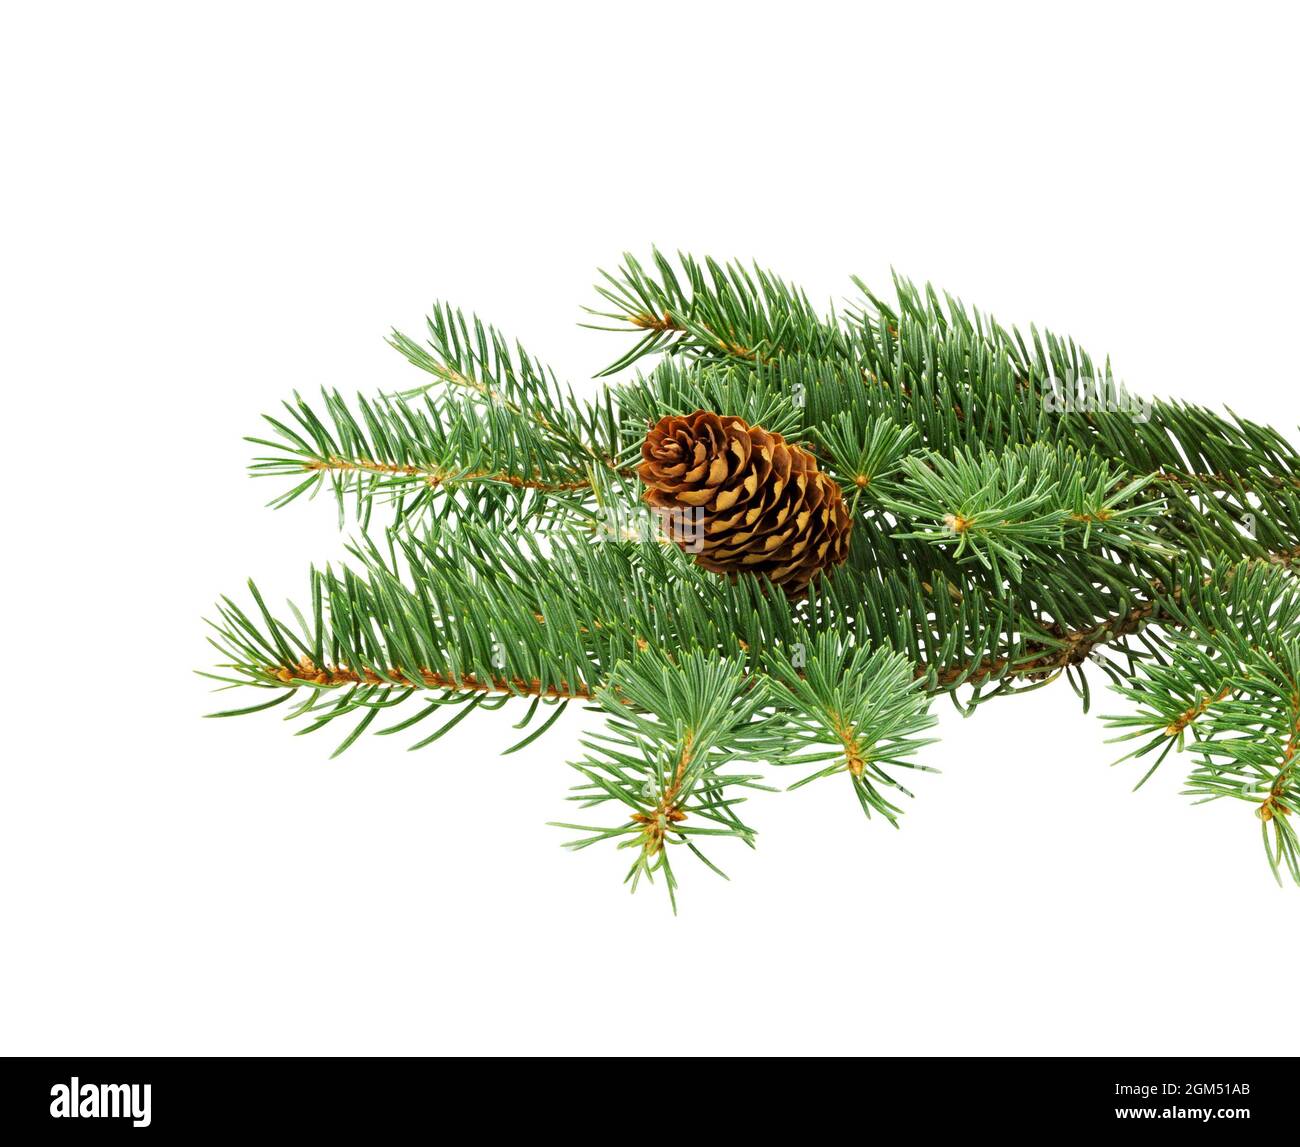 Spruce branch with cones isolated on white background. Fir tree branch. Spruce branch. Christmas fir. Stock Photo